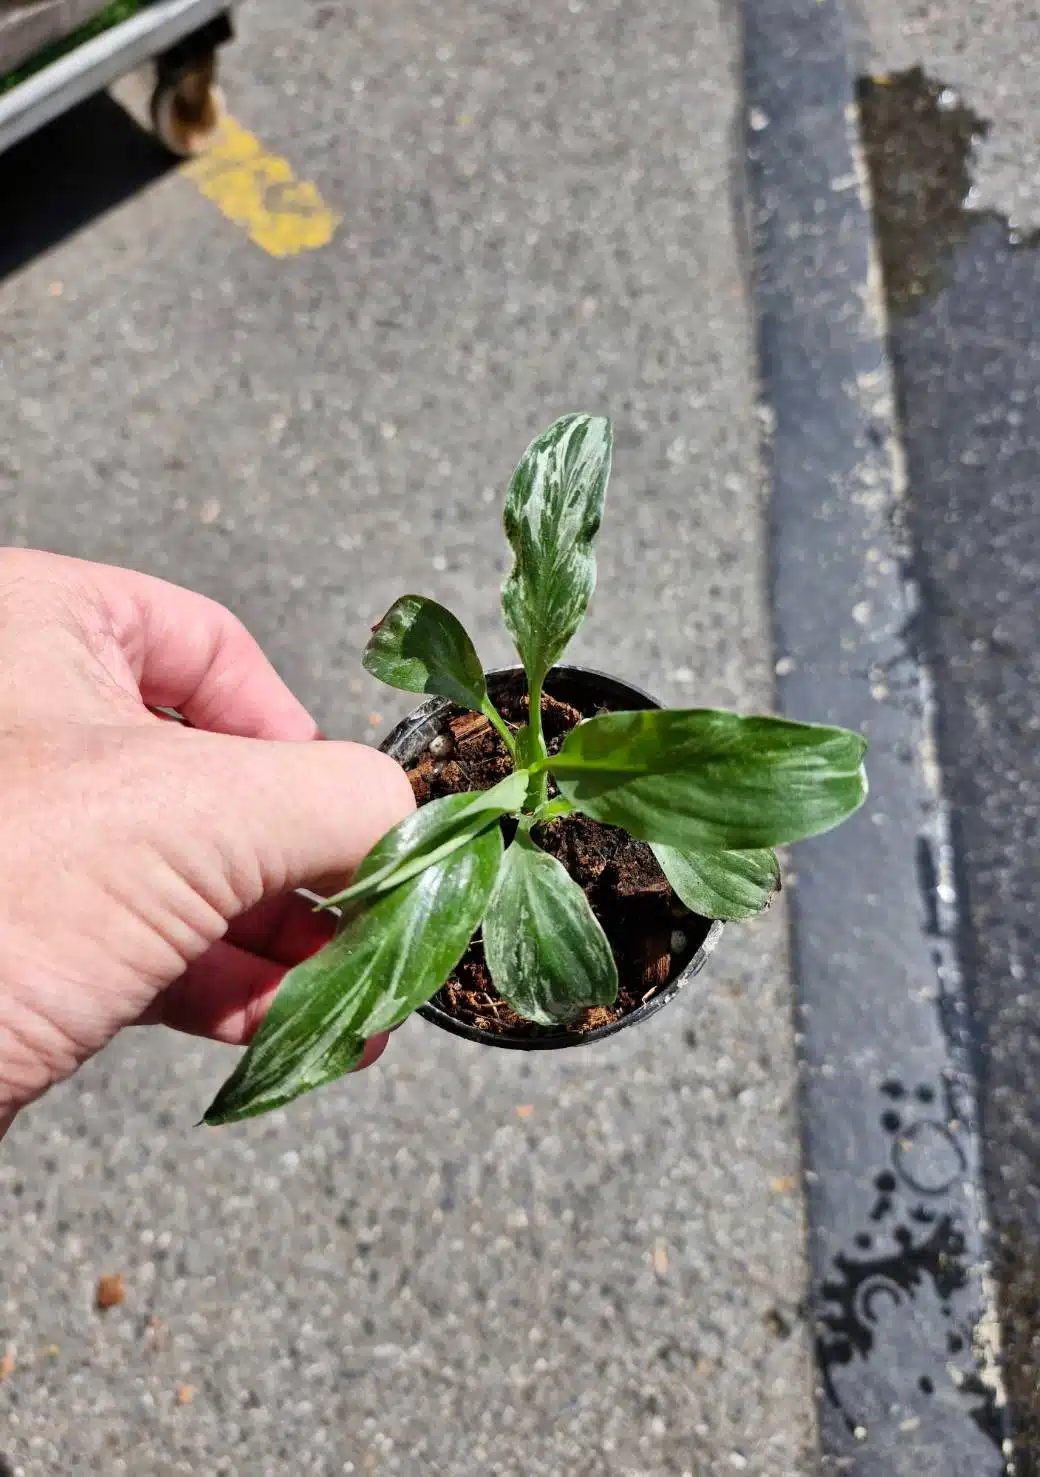 Variegated Spathiphyllum 'Sensation' young plant from TC (Tissue Culture)